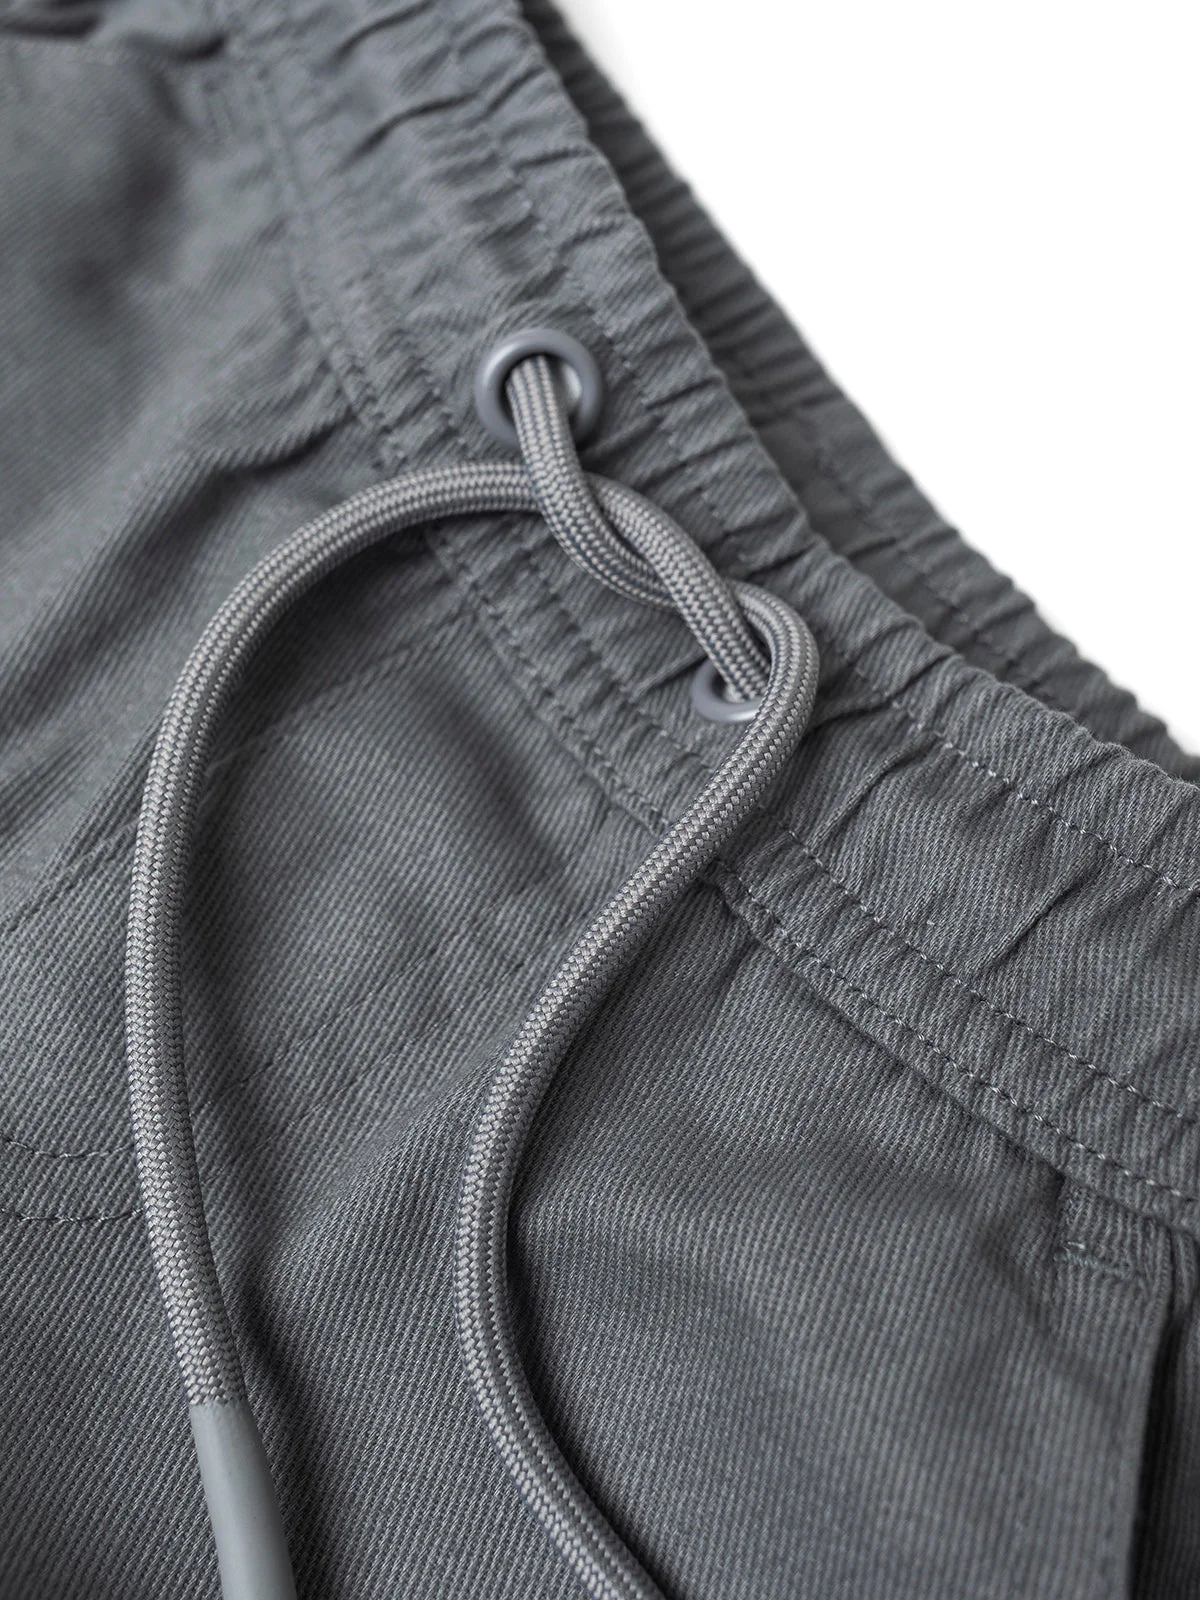 Cotton Twill Shorts - Charcoal